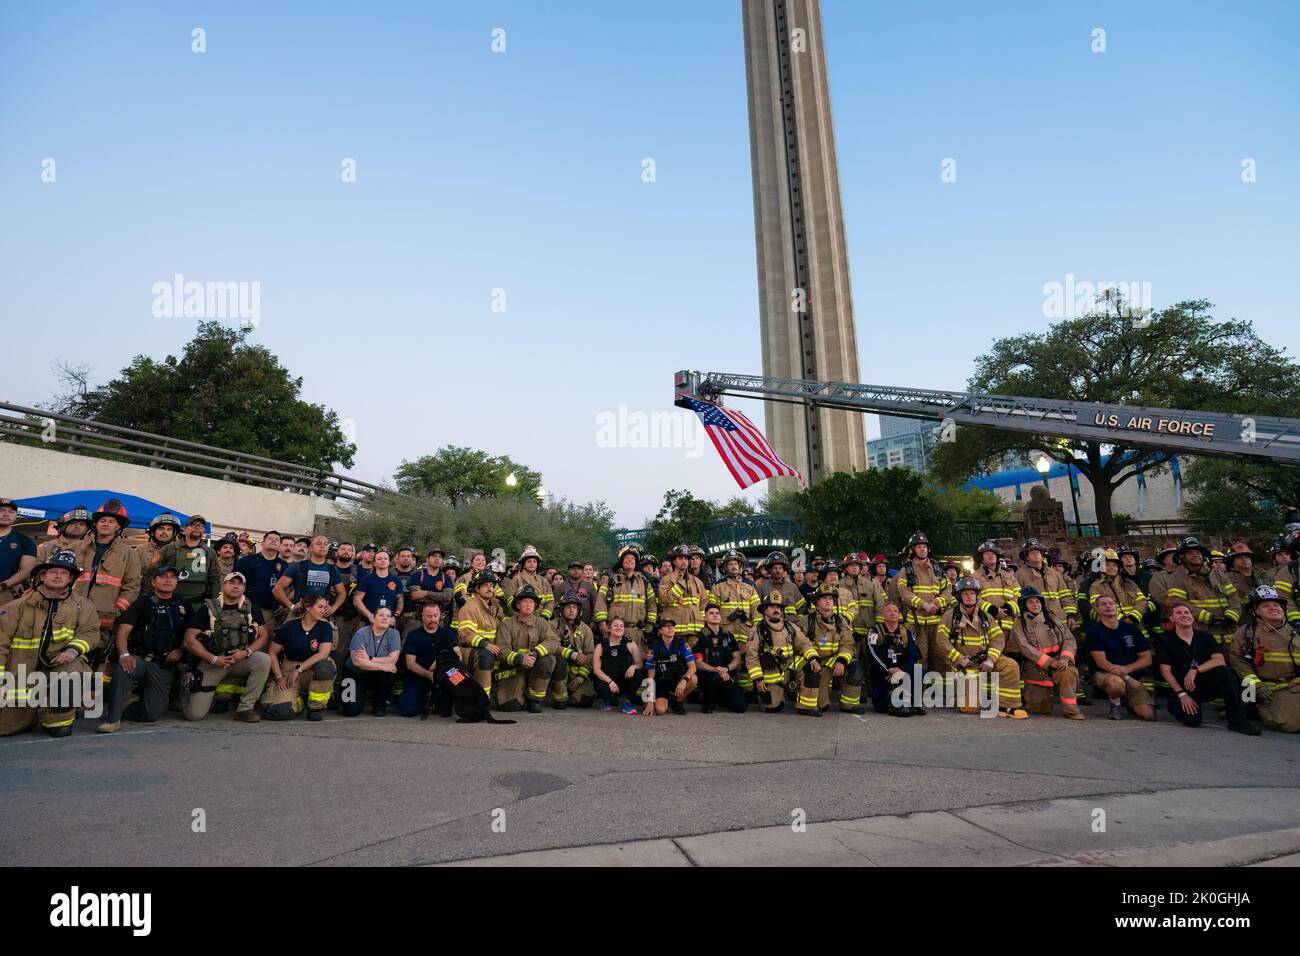 Firefighters and other first responders line up for a group photo before embarking on the San Antonio 110 9/11 memorial climb up the Tower of the Amer Stock Photo